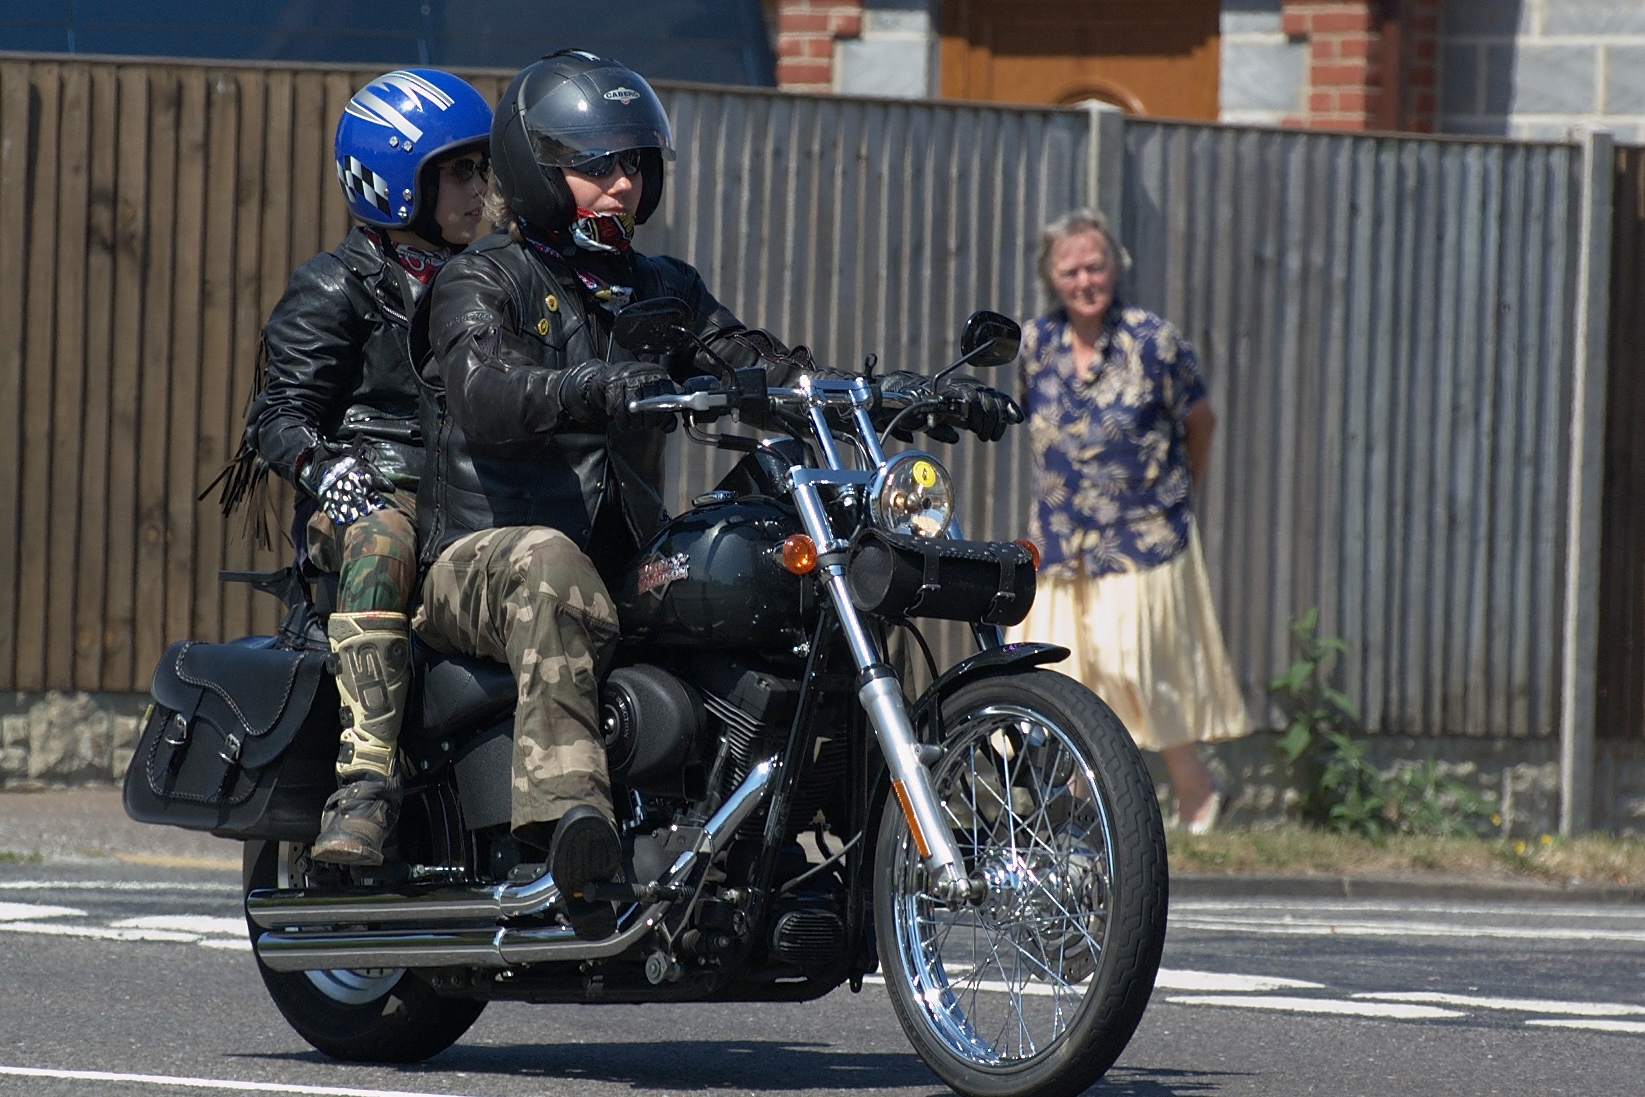 two people riding on the back of a motorcycle down a street